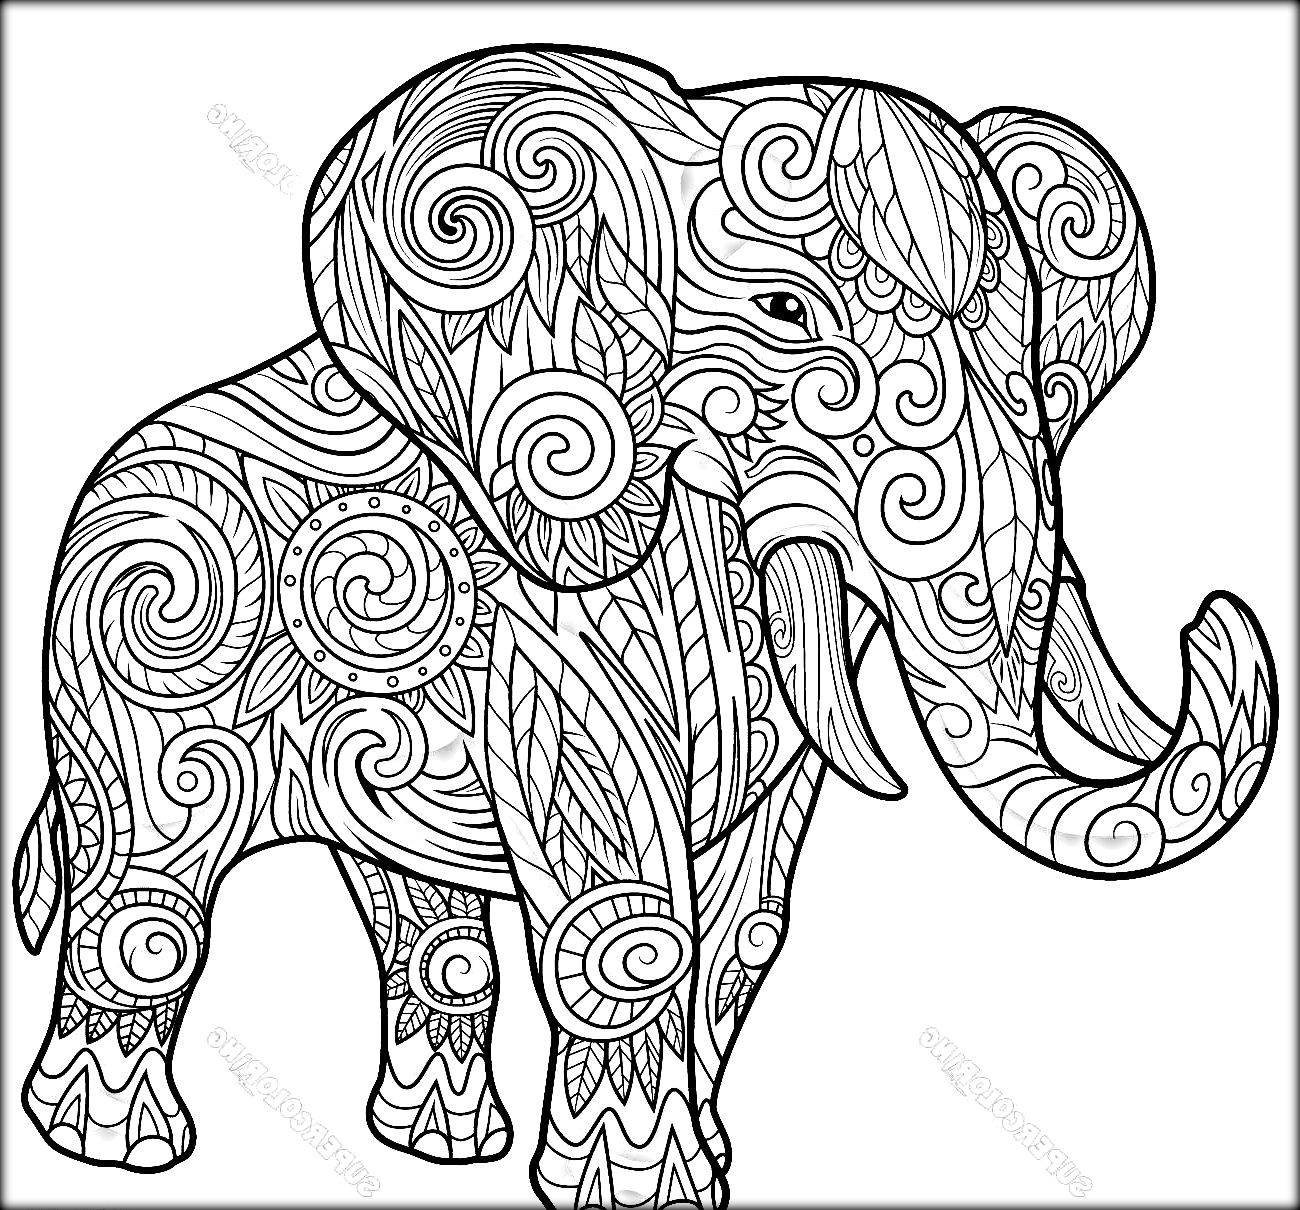 Artistic Coloring Sheets For Kids
 Coloring Pages For Adults Elephant The Art Jinni